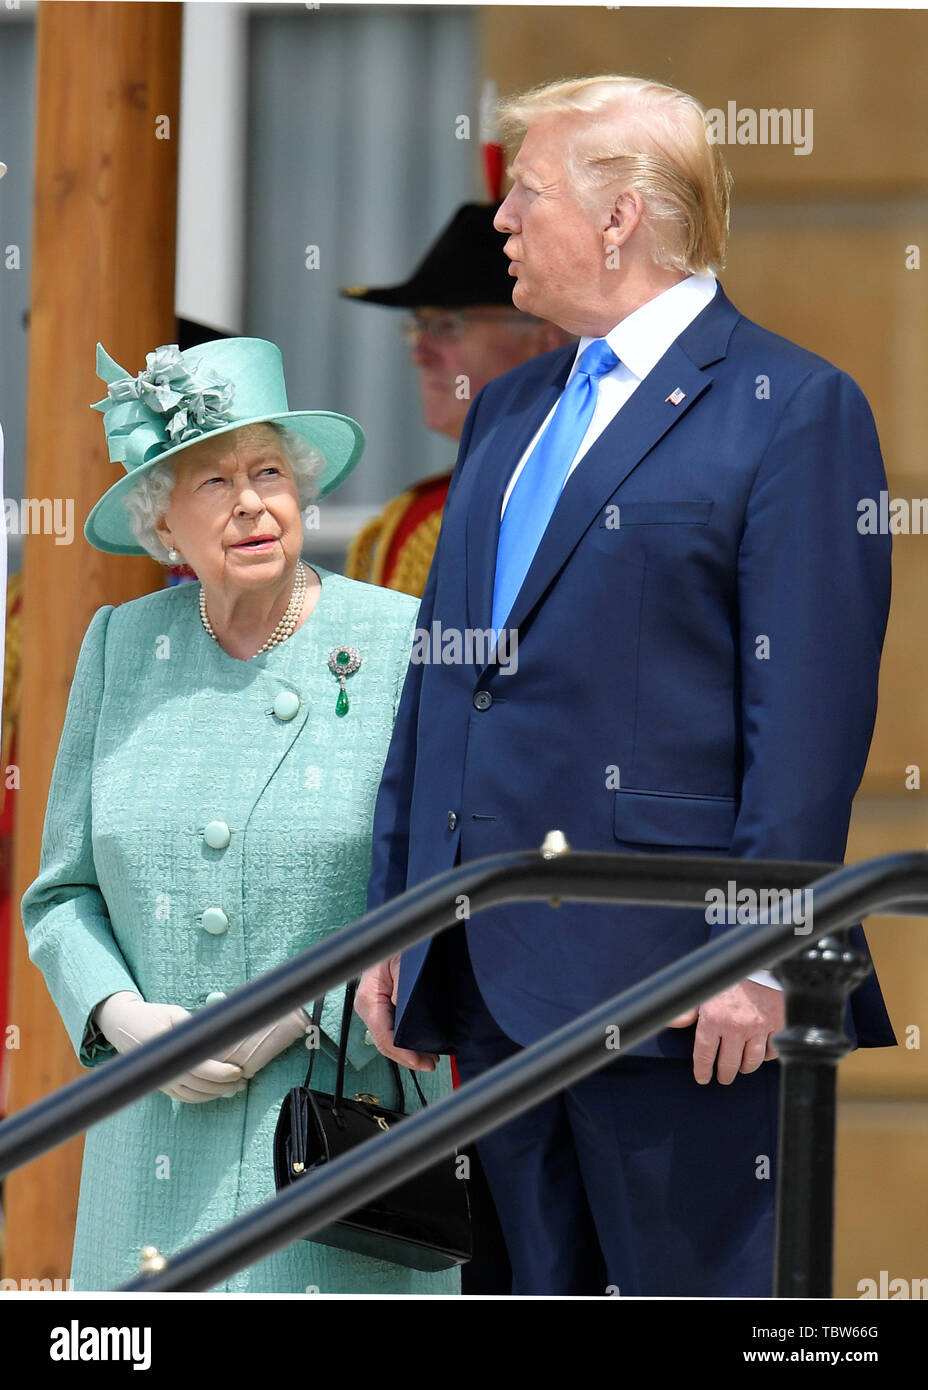 Queen Elizabeth II and US President Donald Trump during a Ceremonial Welcome at Buckingham Palace, London, on day one of his three day state visit to the UK. Stock Photo